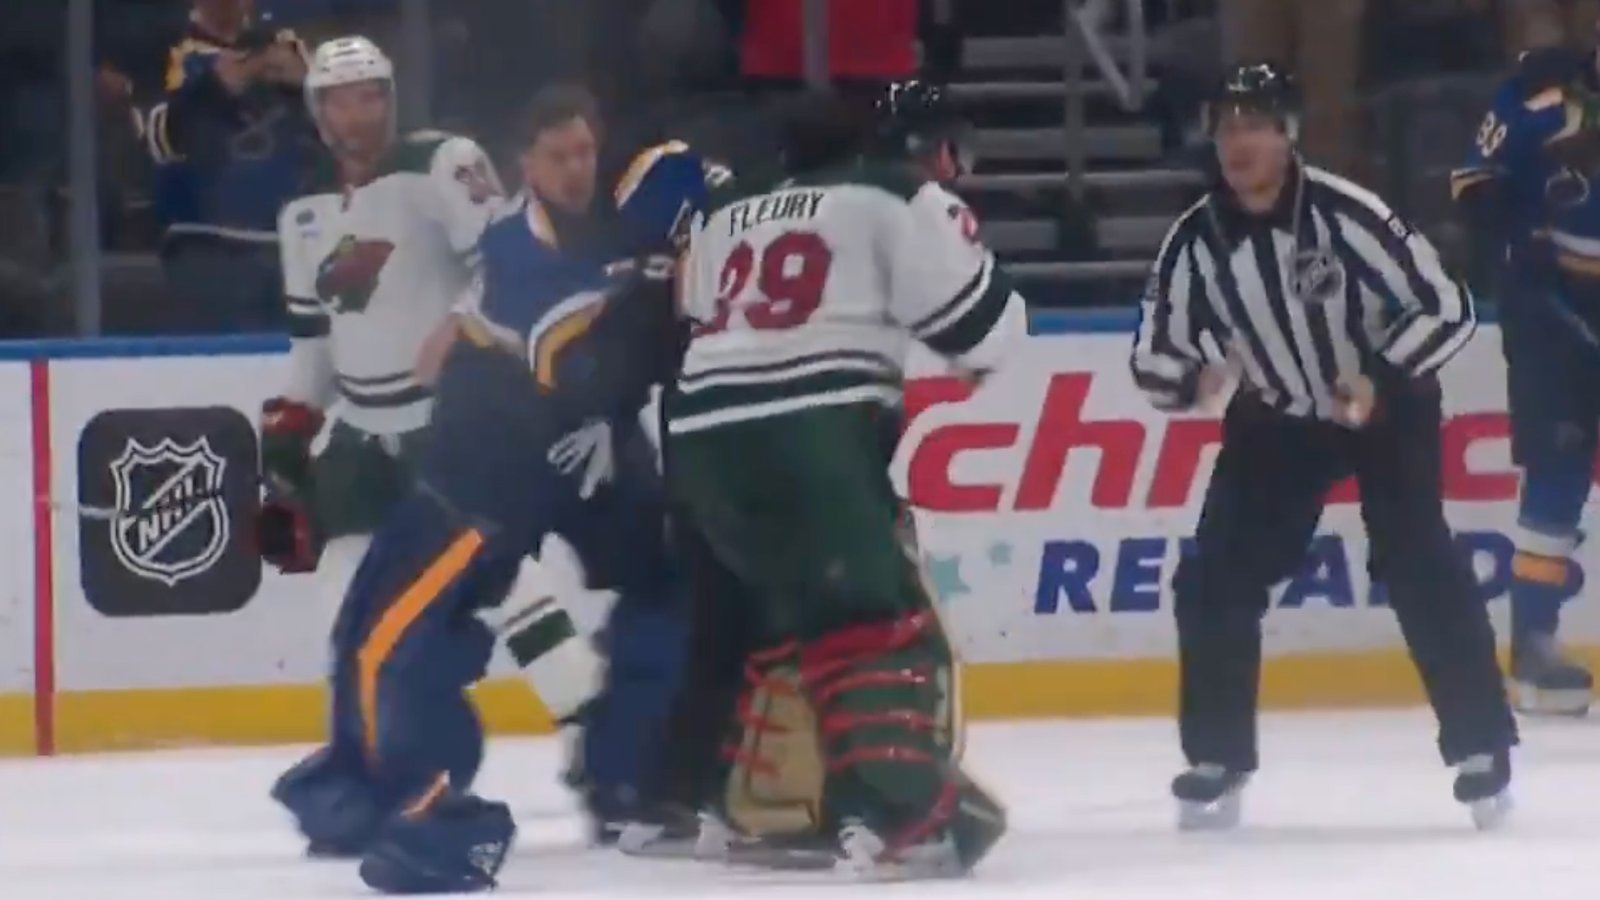 Jordan Binnington flips out, Marc-Andre Fleury wants to fight him in chaotic incident in St. Louis